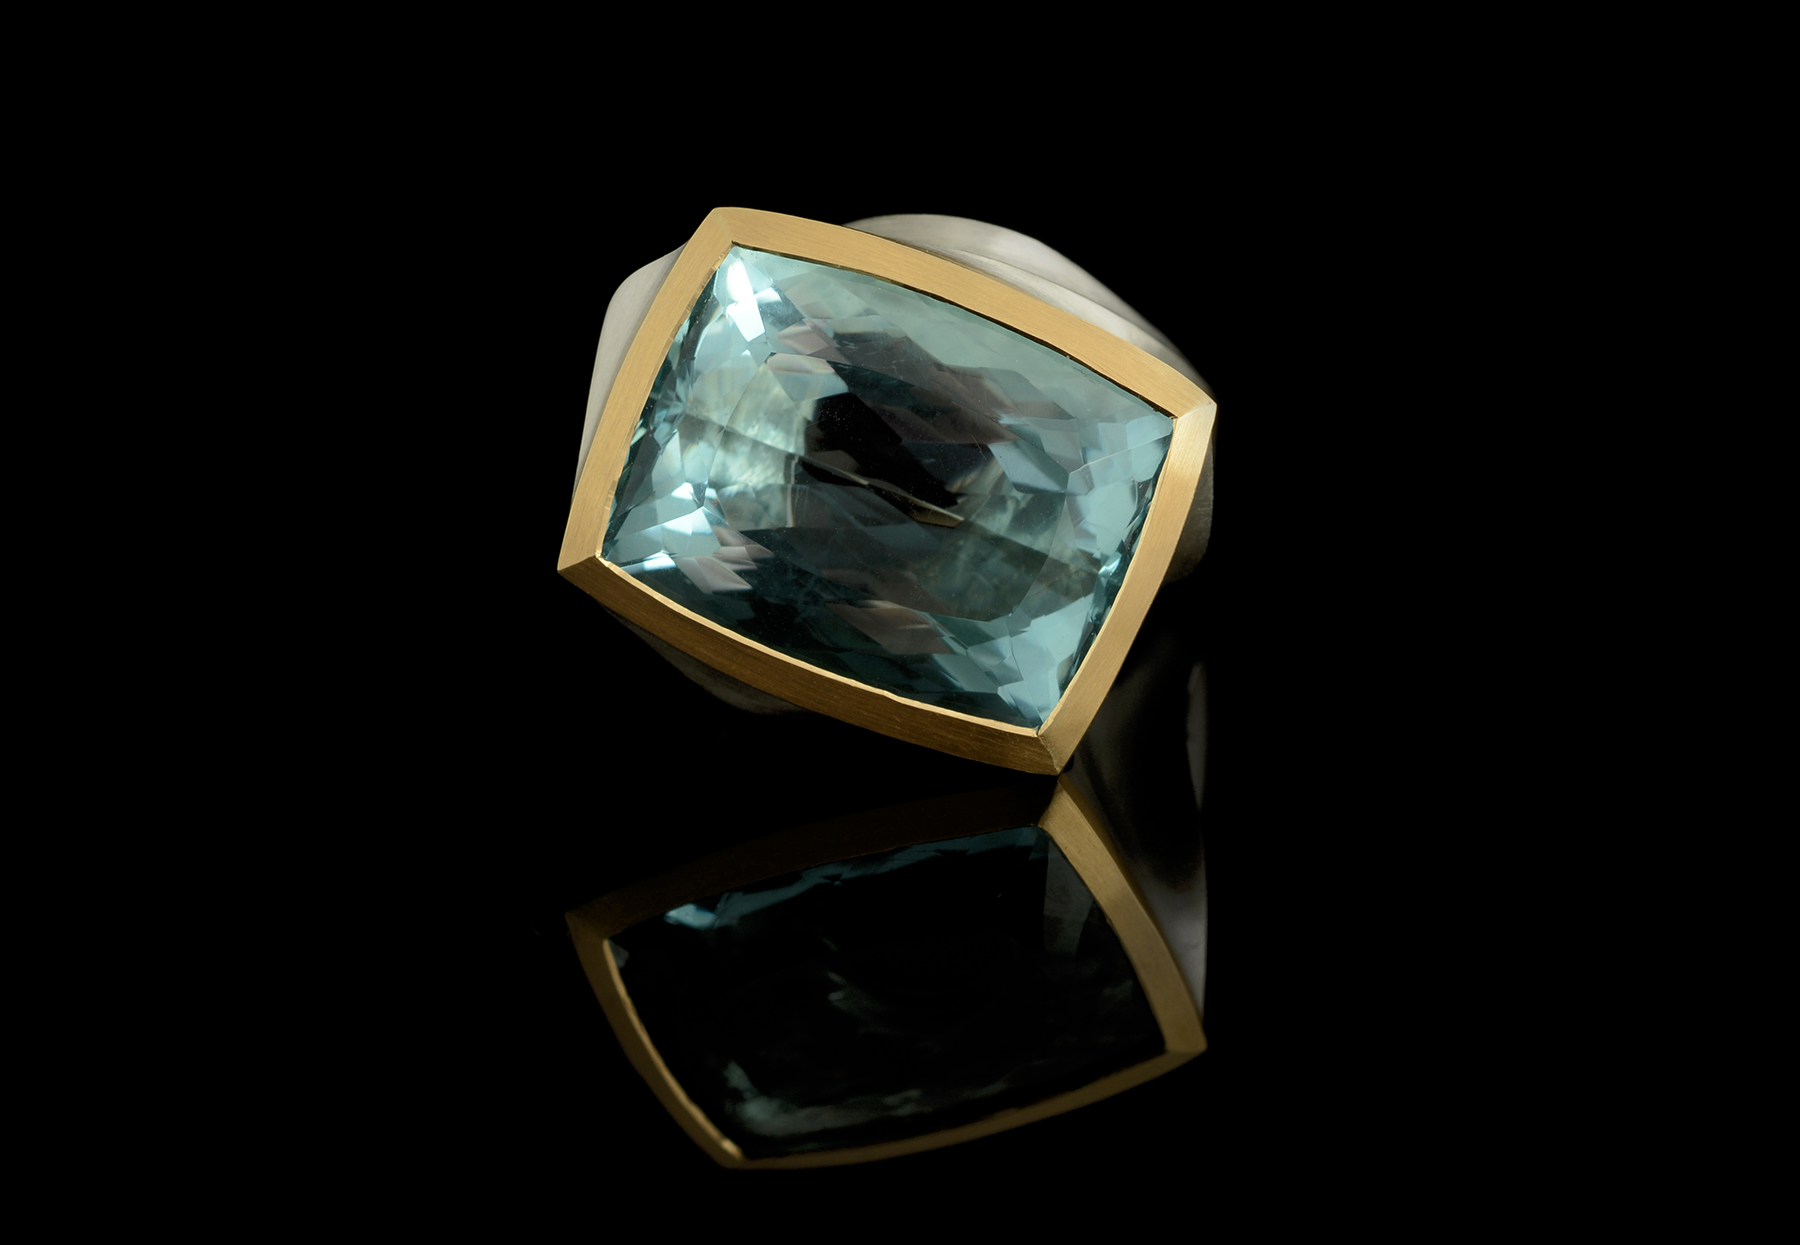 Arris carved statement cocktail ring with blue stone